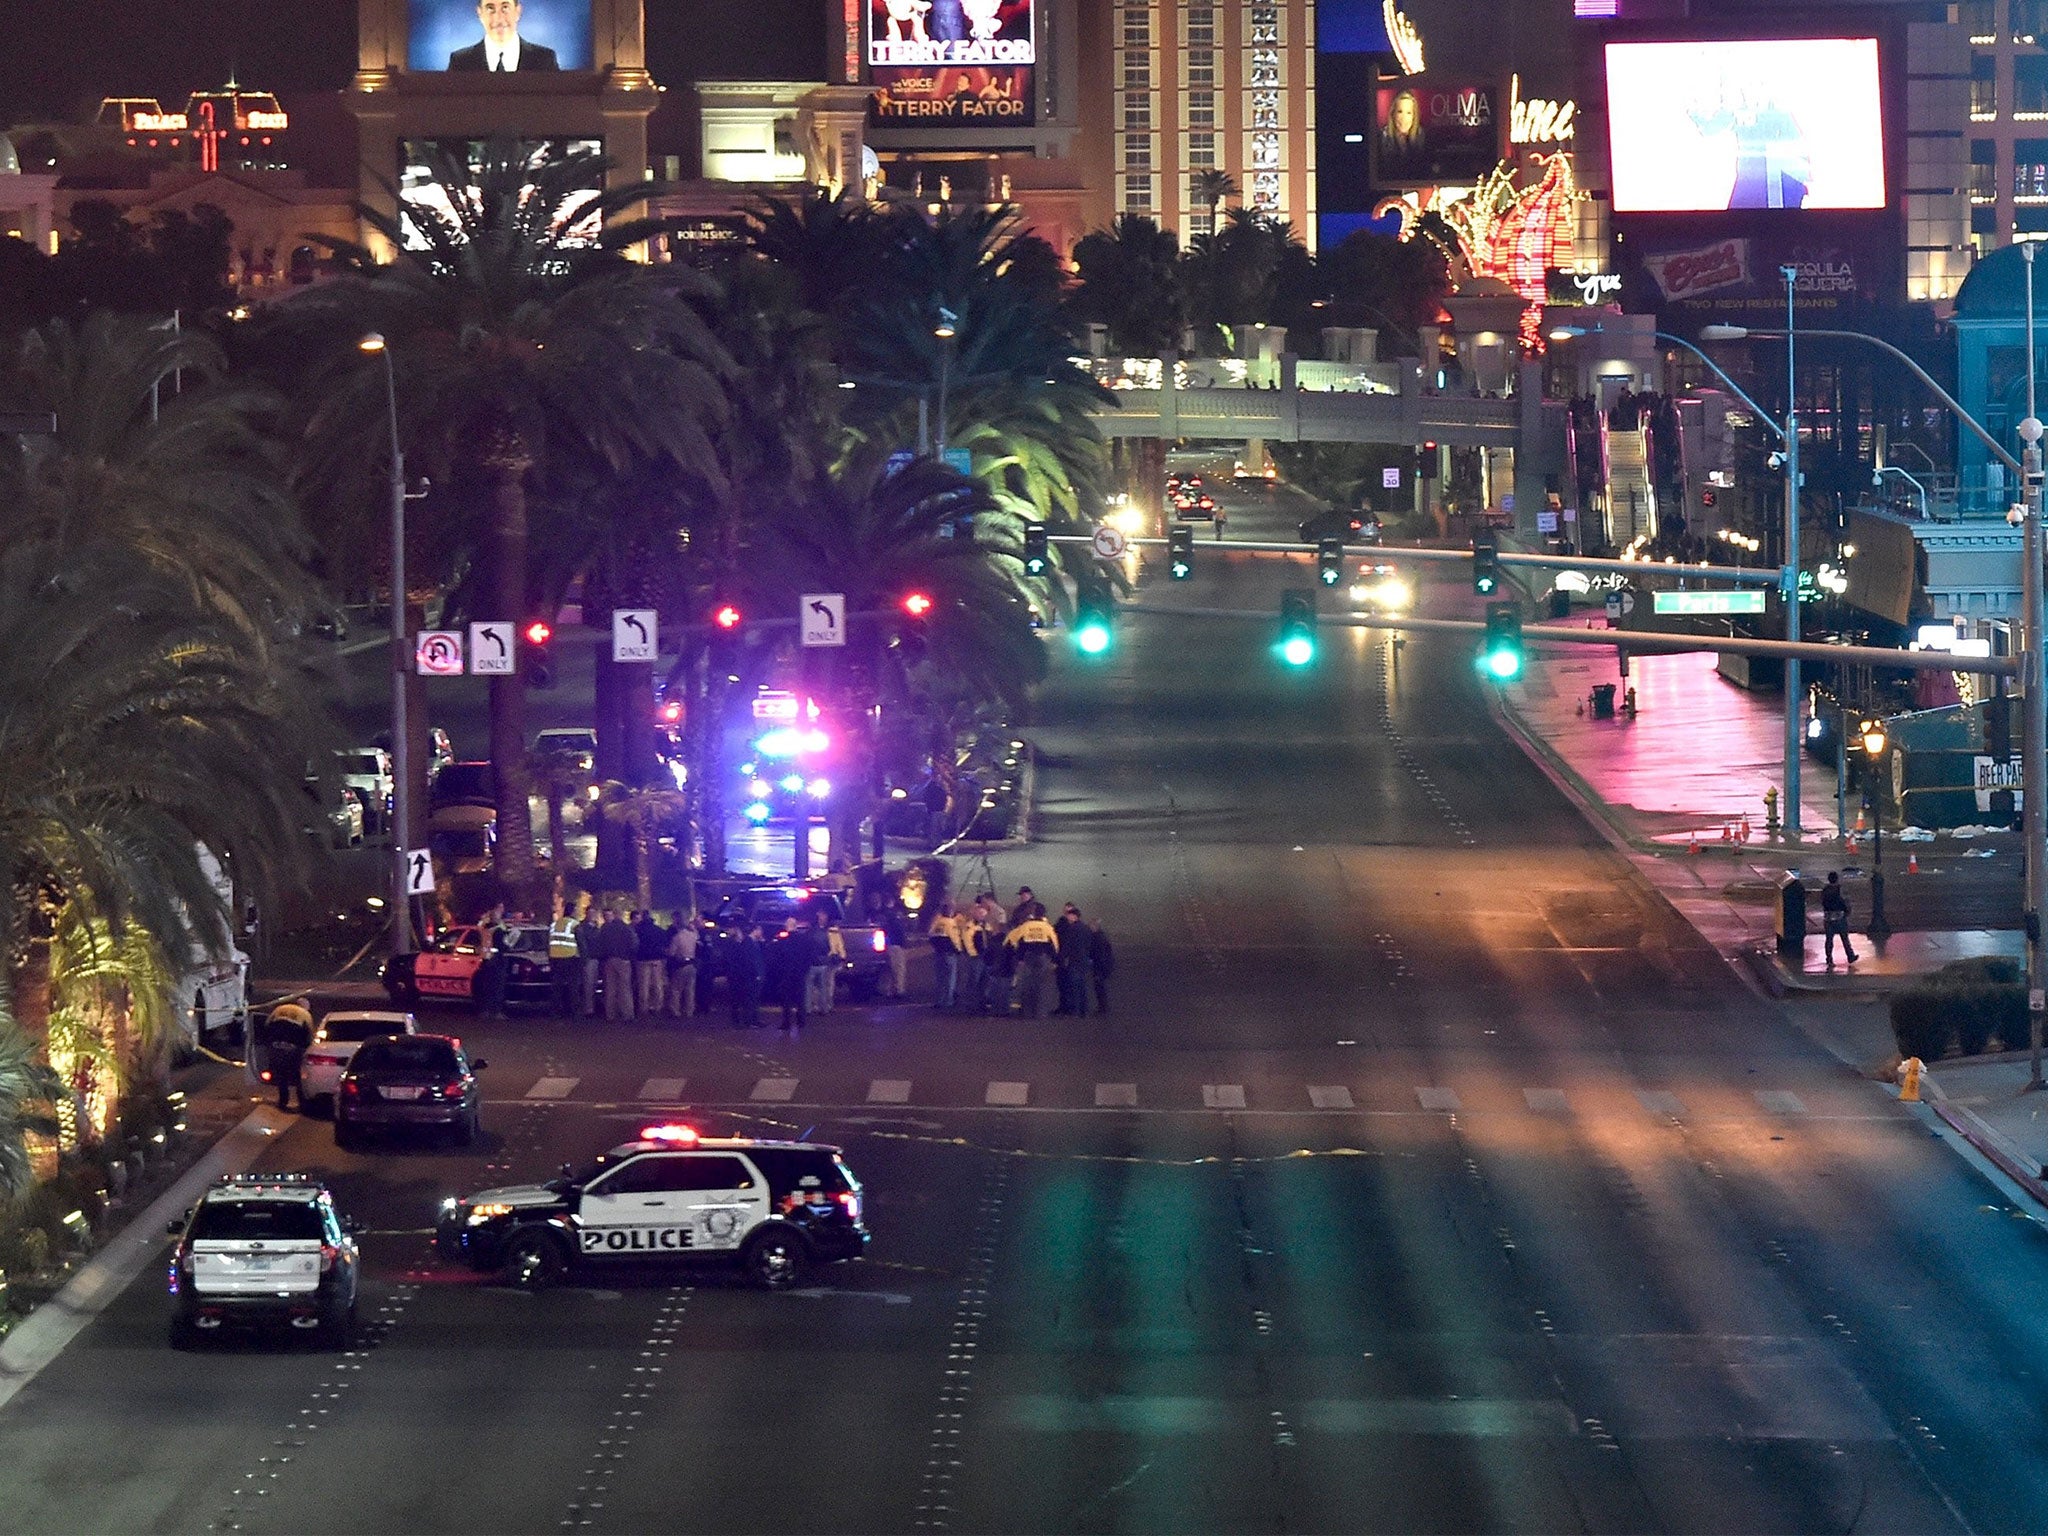 Police at the scene on the Las Vegas Strip following the incident